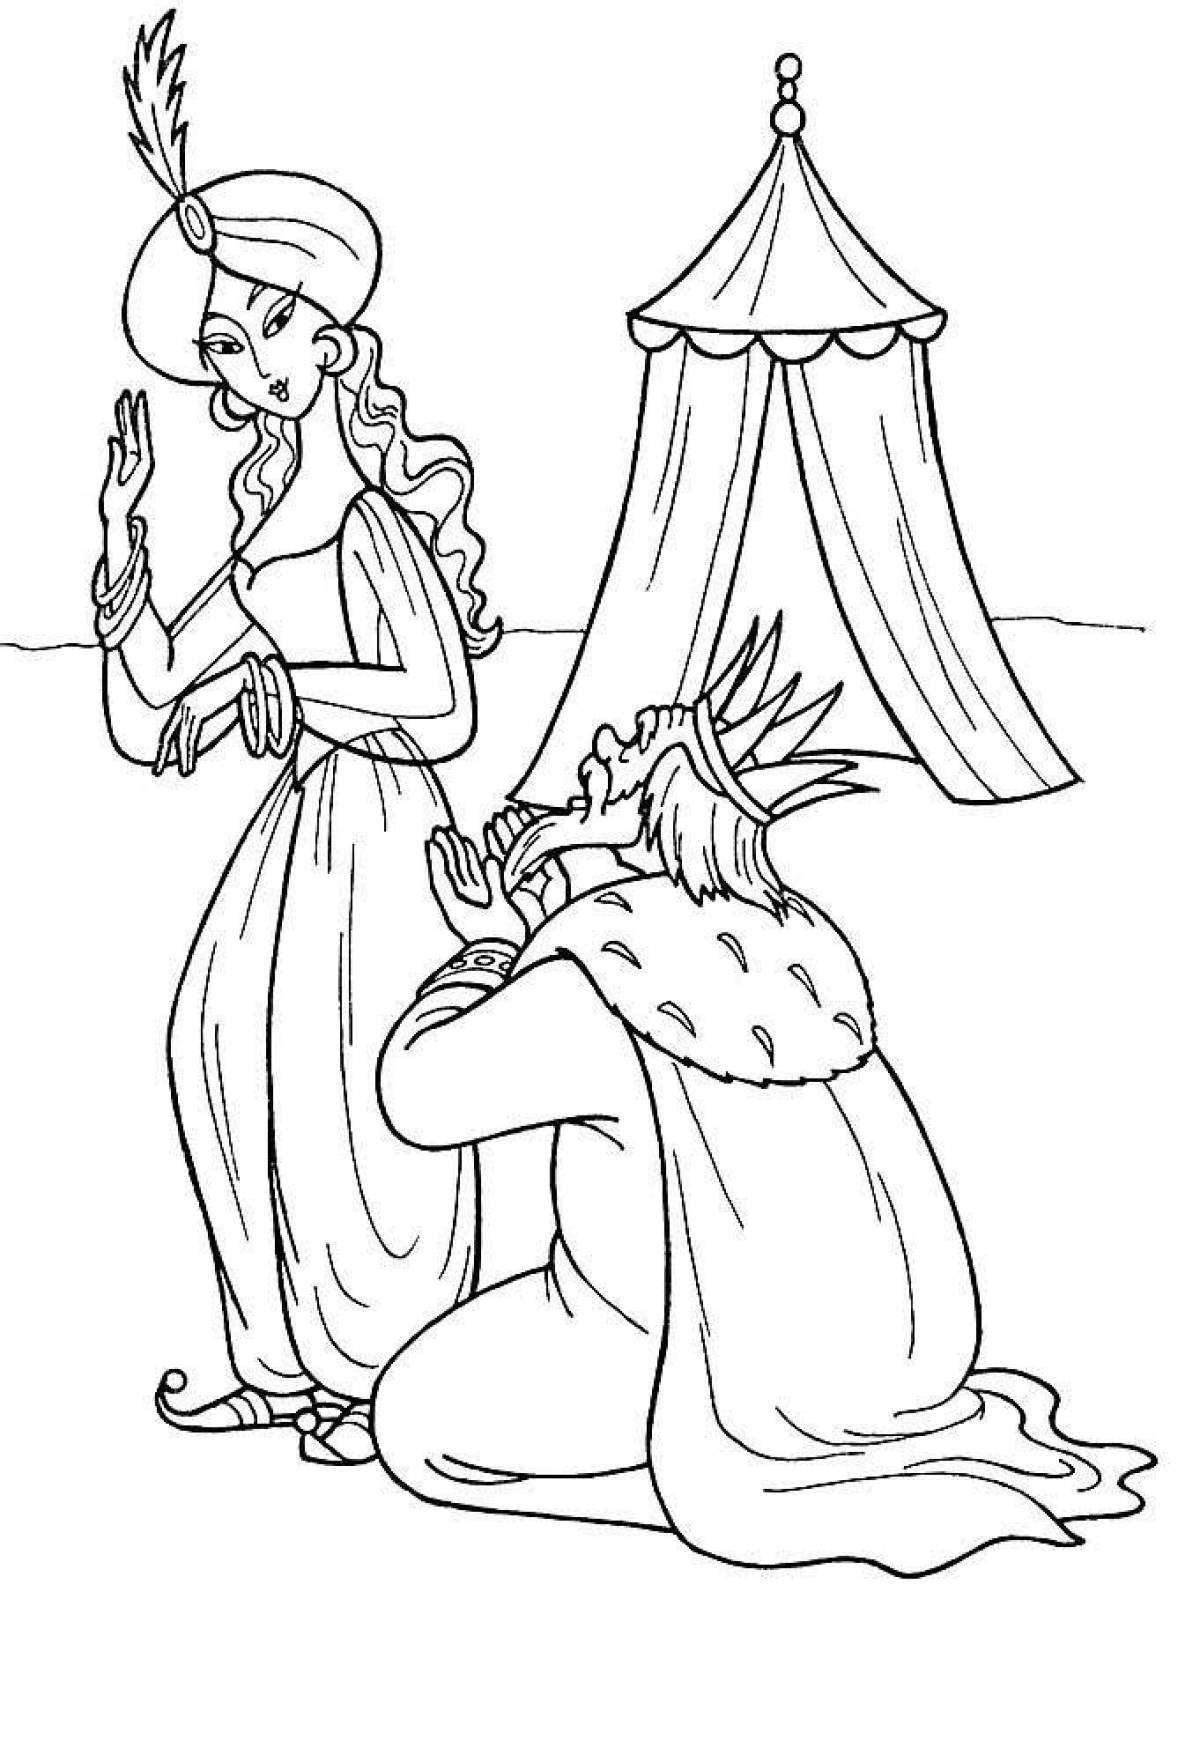 Inviting coloring book from Pushkin's fairy tales